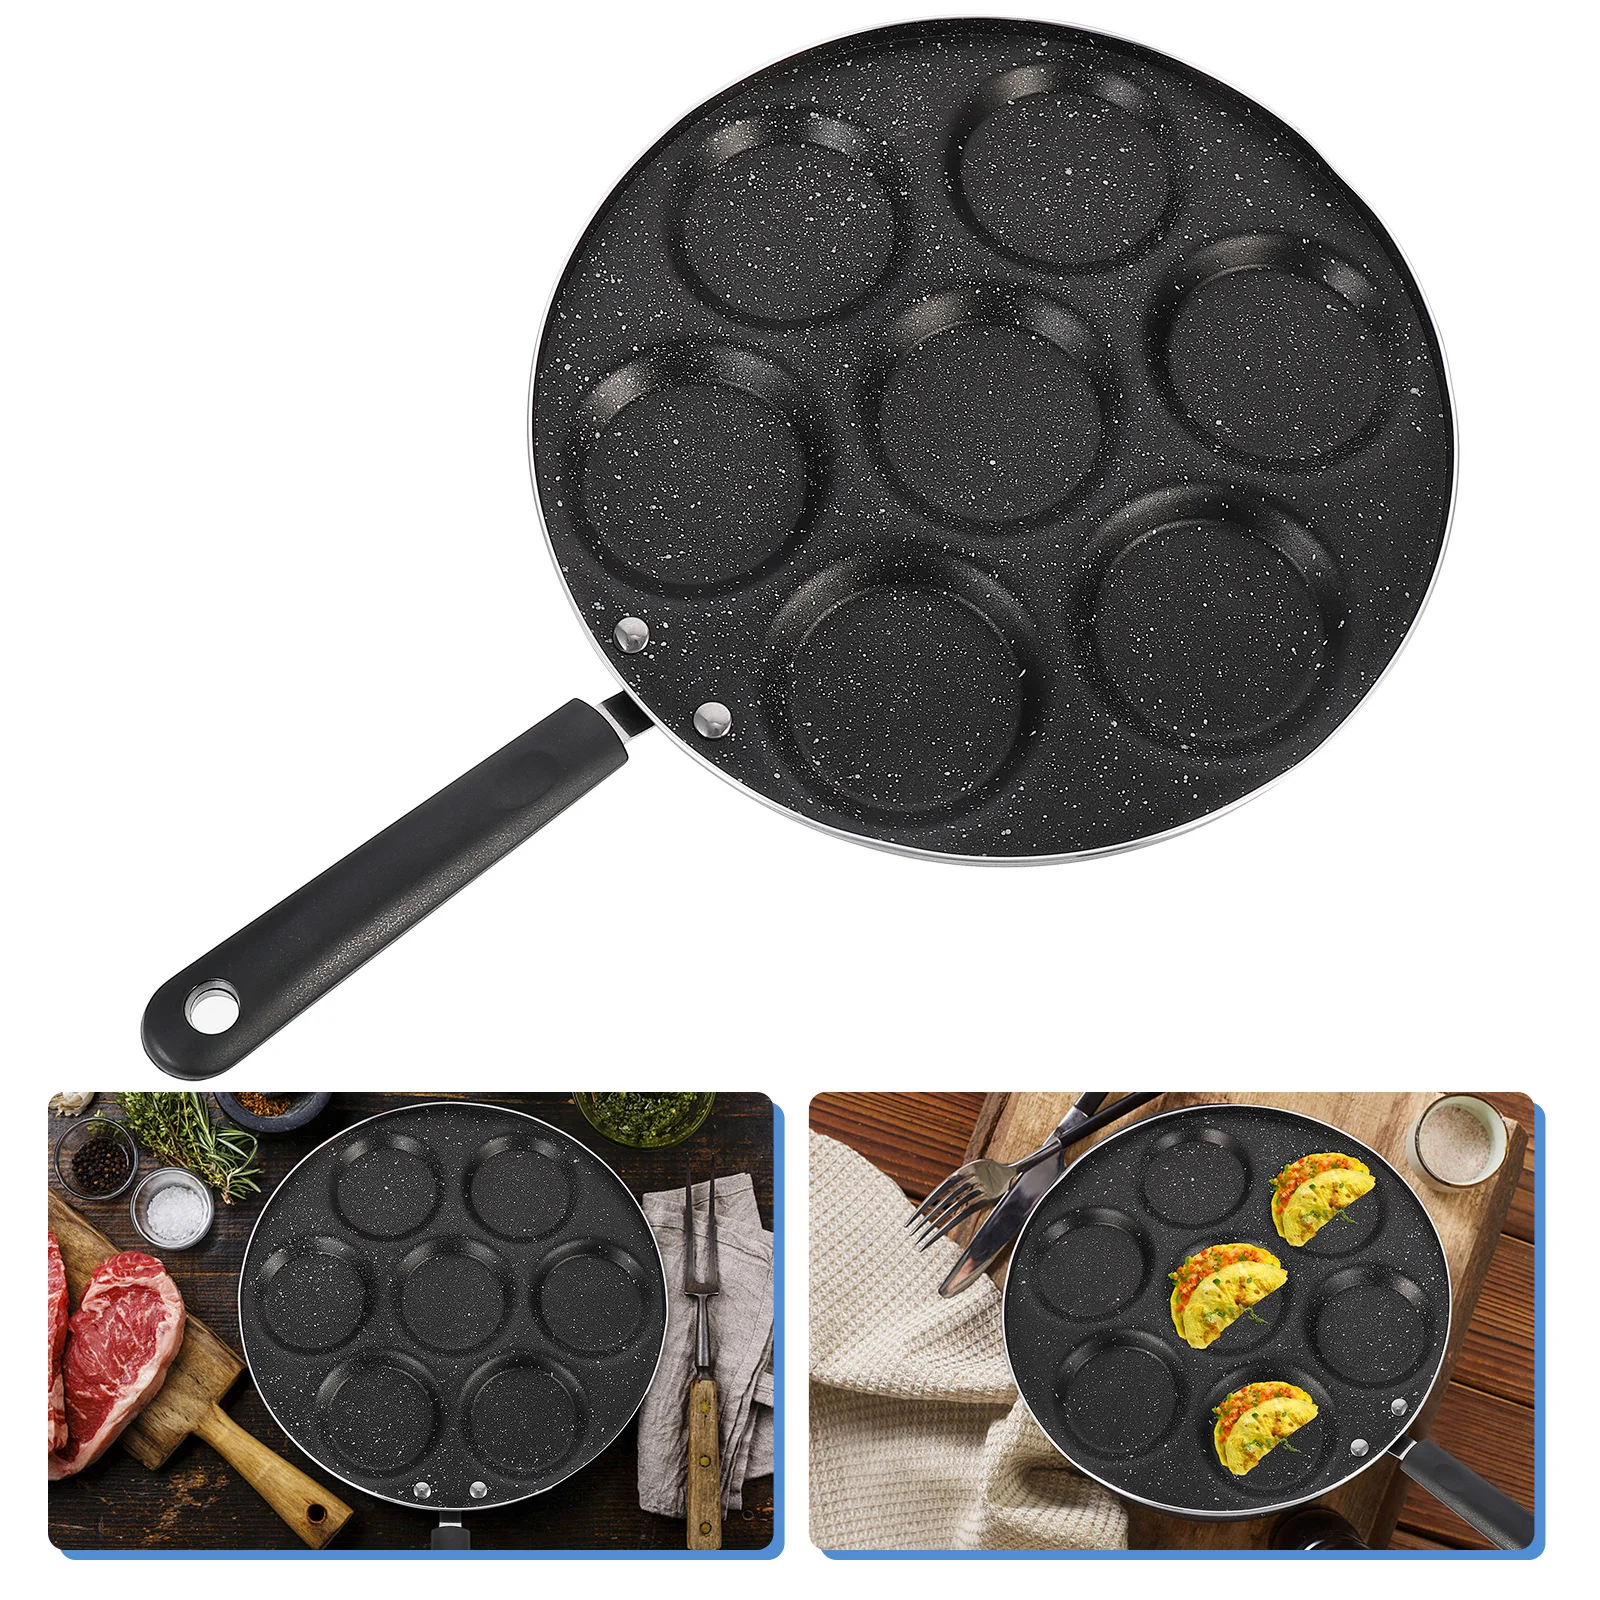 

Pan Egg Pancake Nonstick Frying Maker Griddle Cups Omelette Poached Poacher Skillet Blini Poaching Eggs Fried Mini Cooking Pans